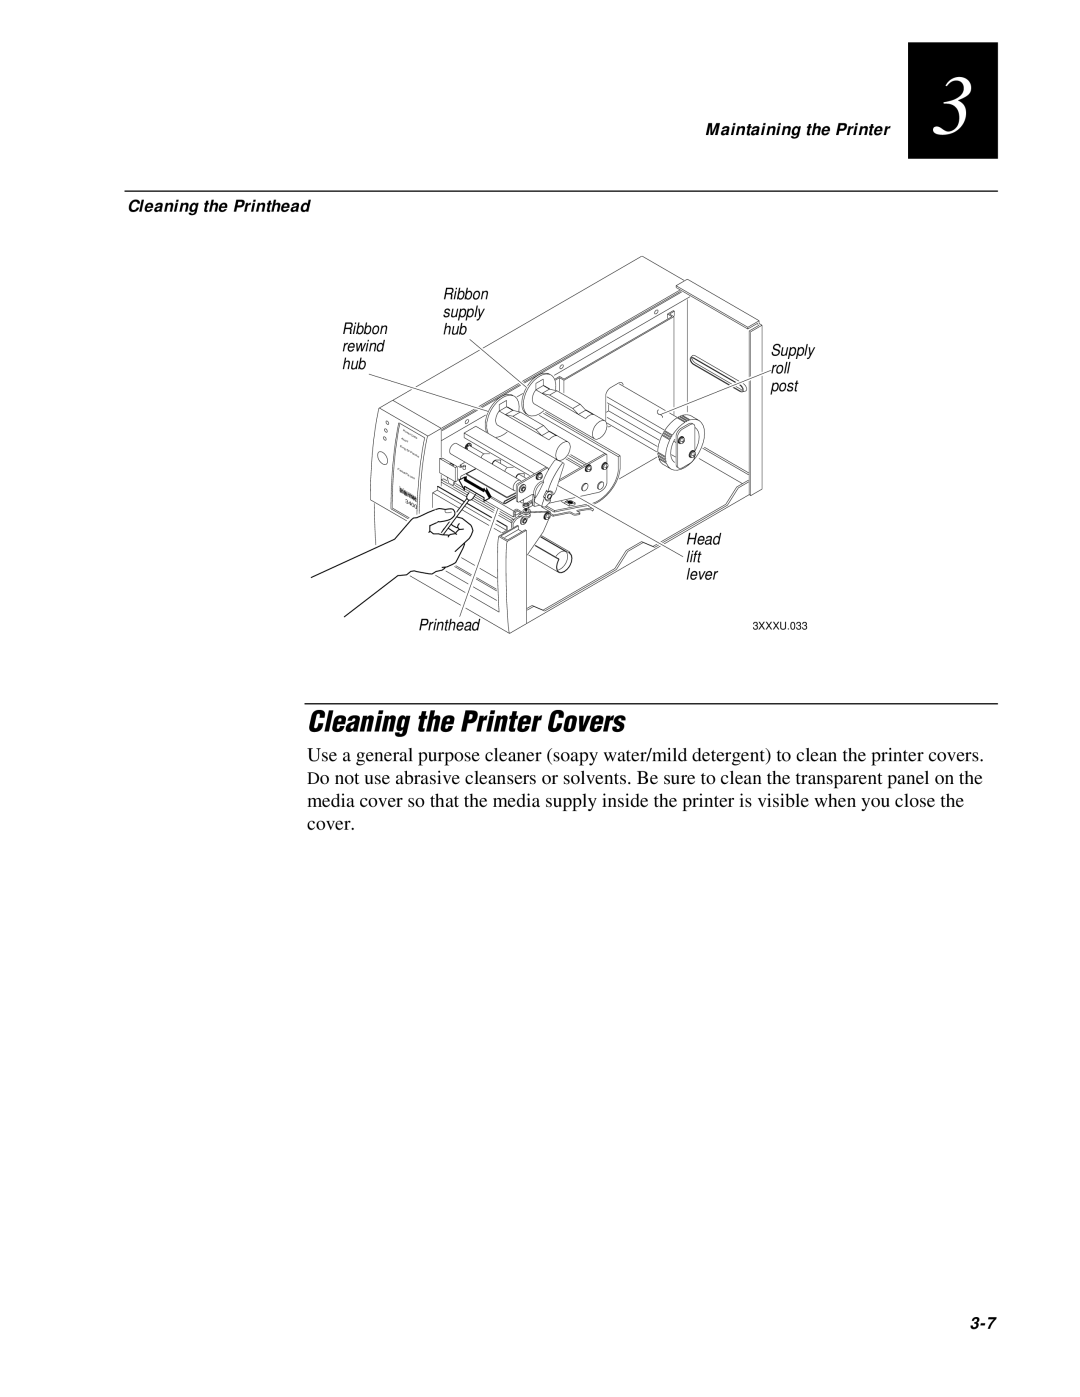 IBM EasyCoder 3400e user manual Cleaning the Printer Covers, Cleaning the Printhead 